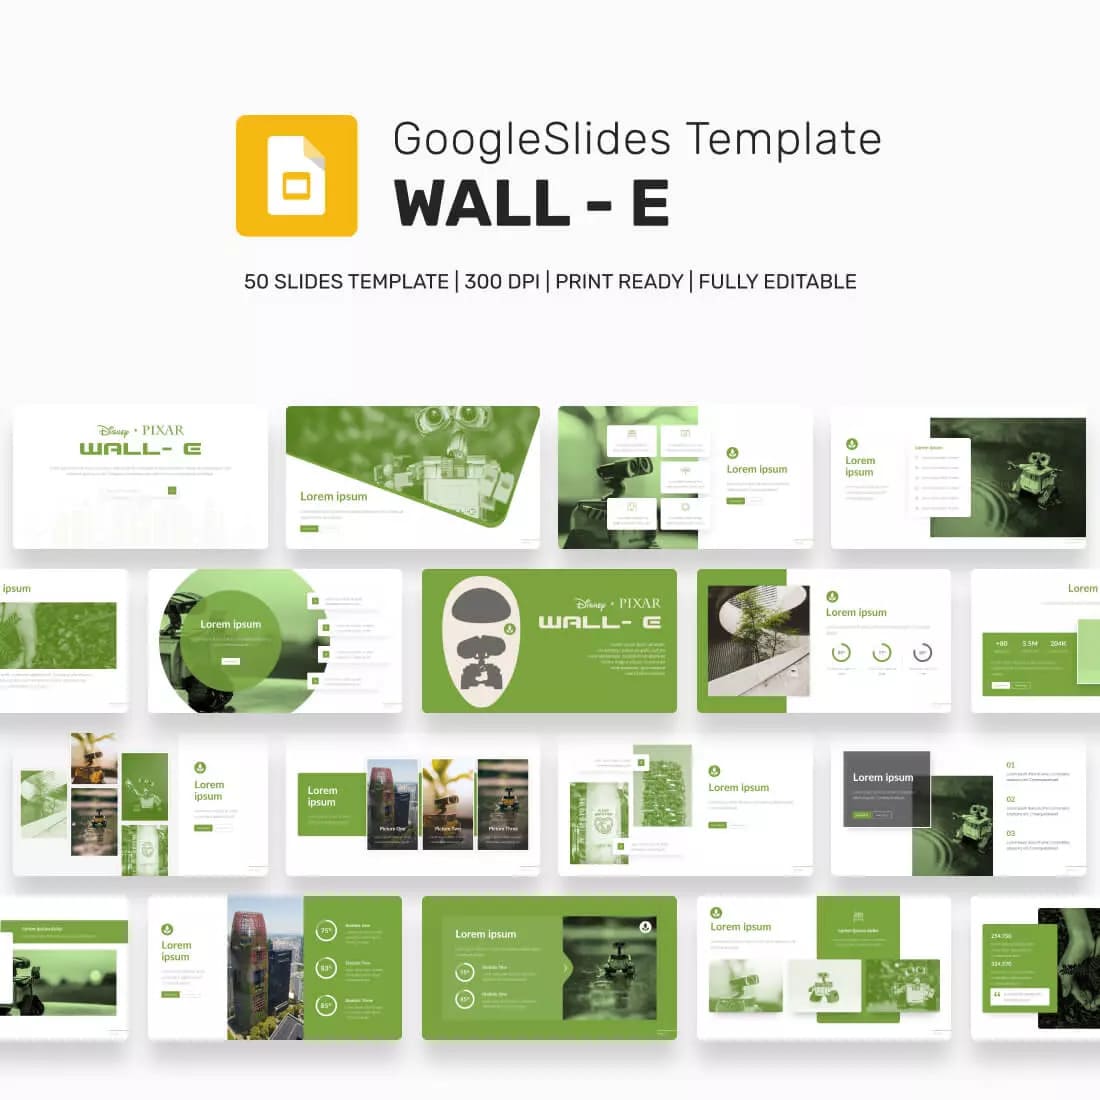 Walle Google Slides Template Preview 1.